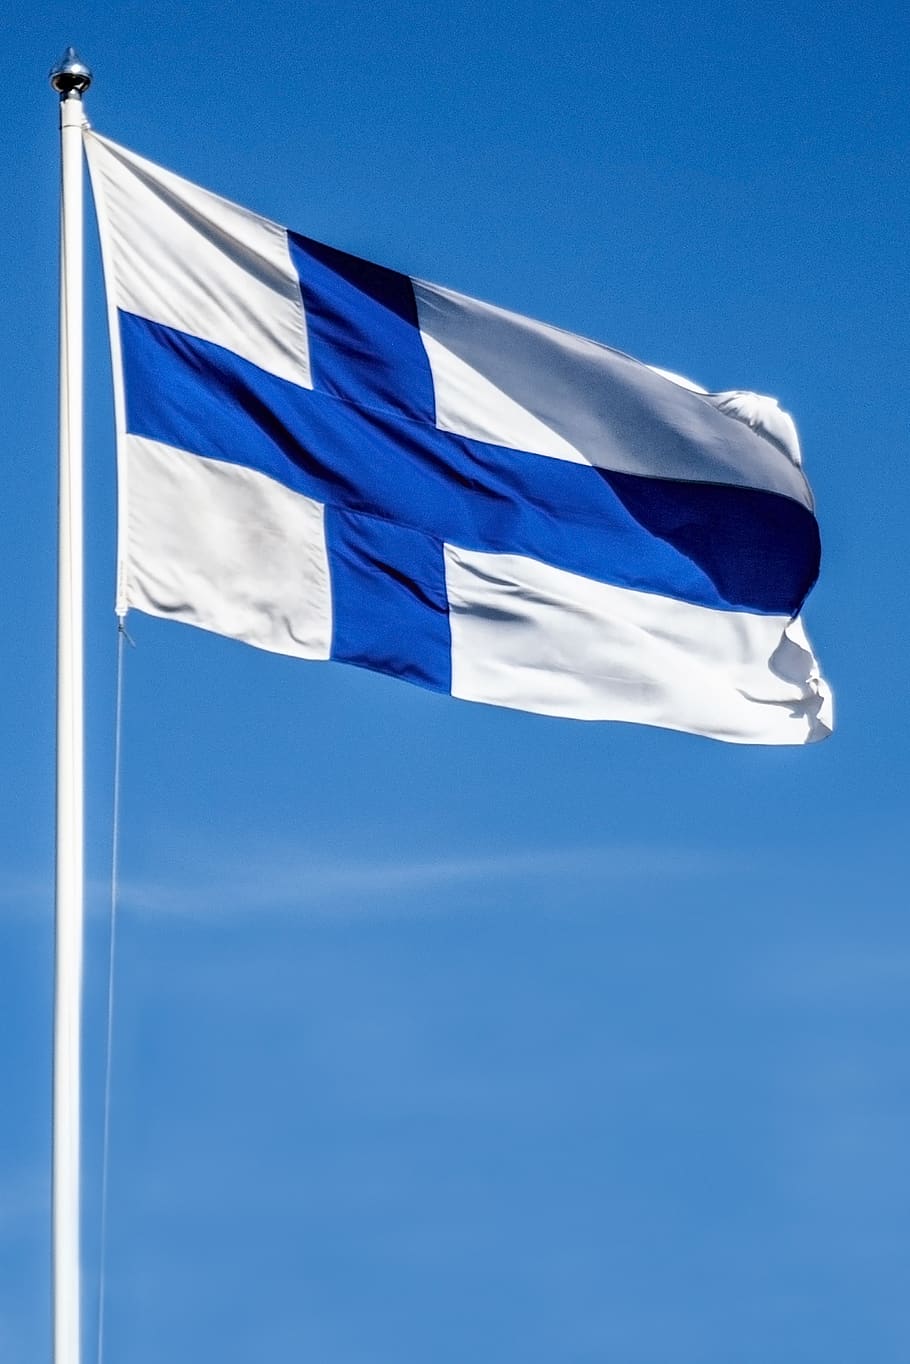 flag of finland, blue cross flag, tickets, blue and white, independence day